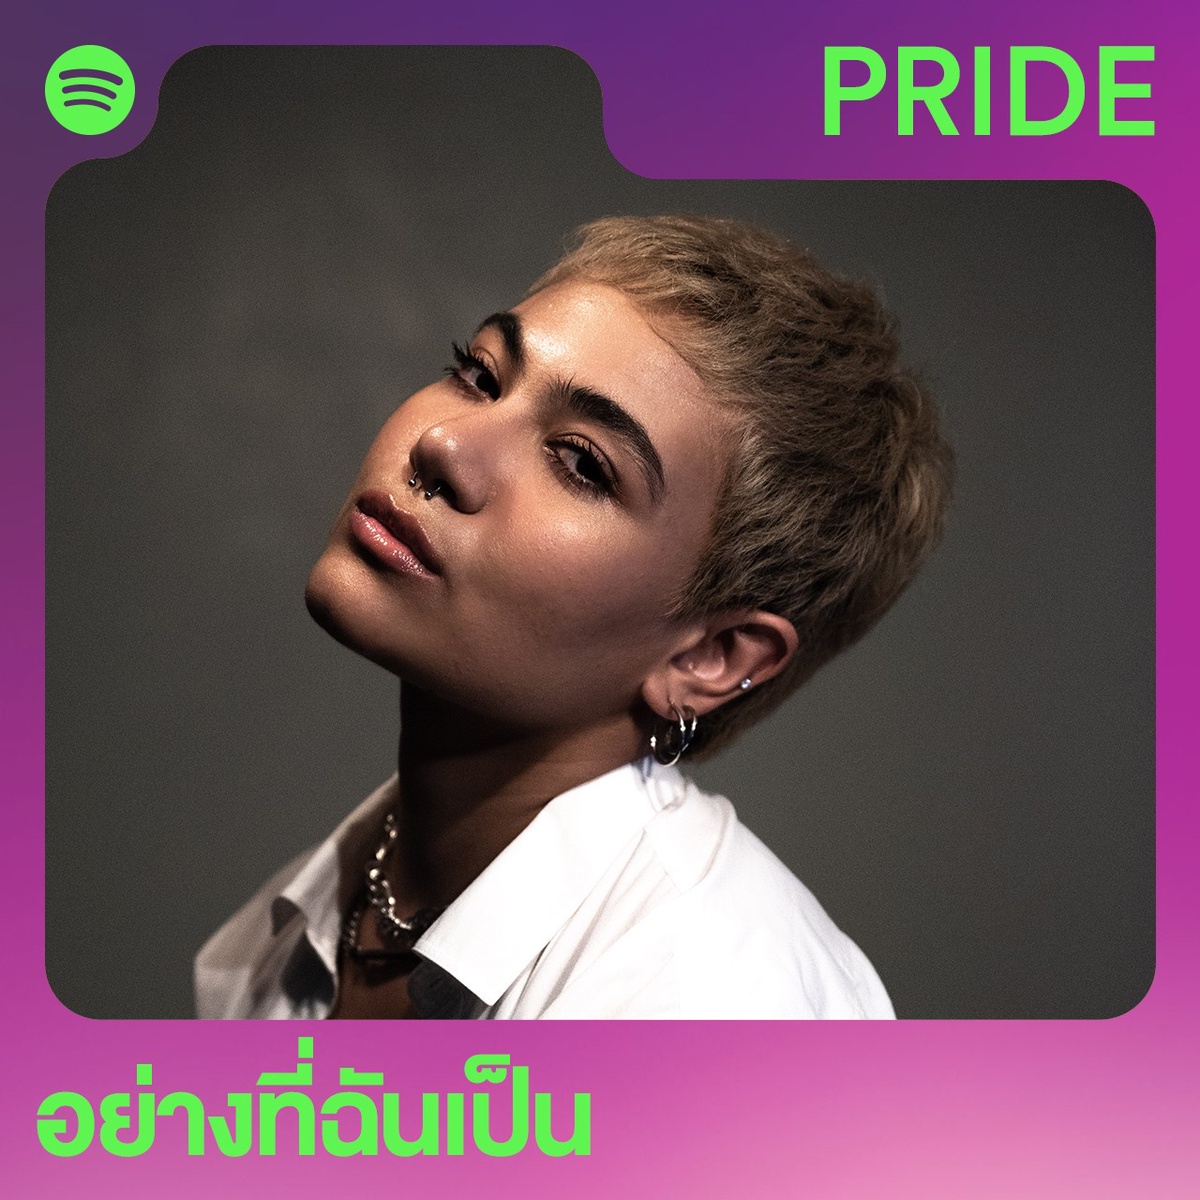 Spotify helps raise the voices of Thai LGBTQIA artists and allies this Pride Month